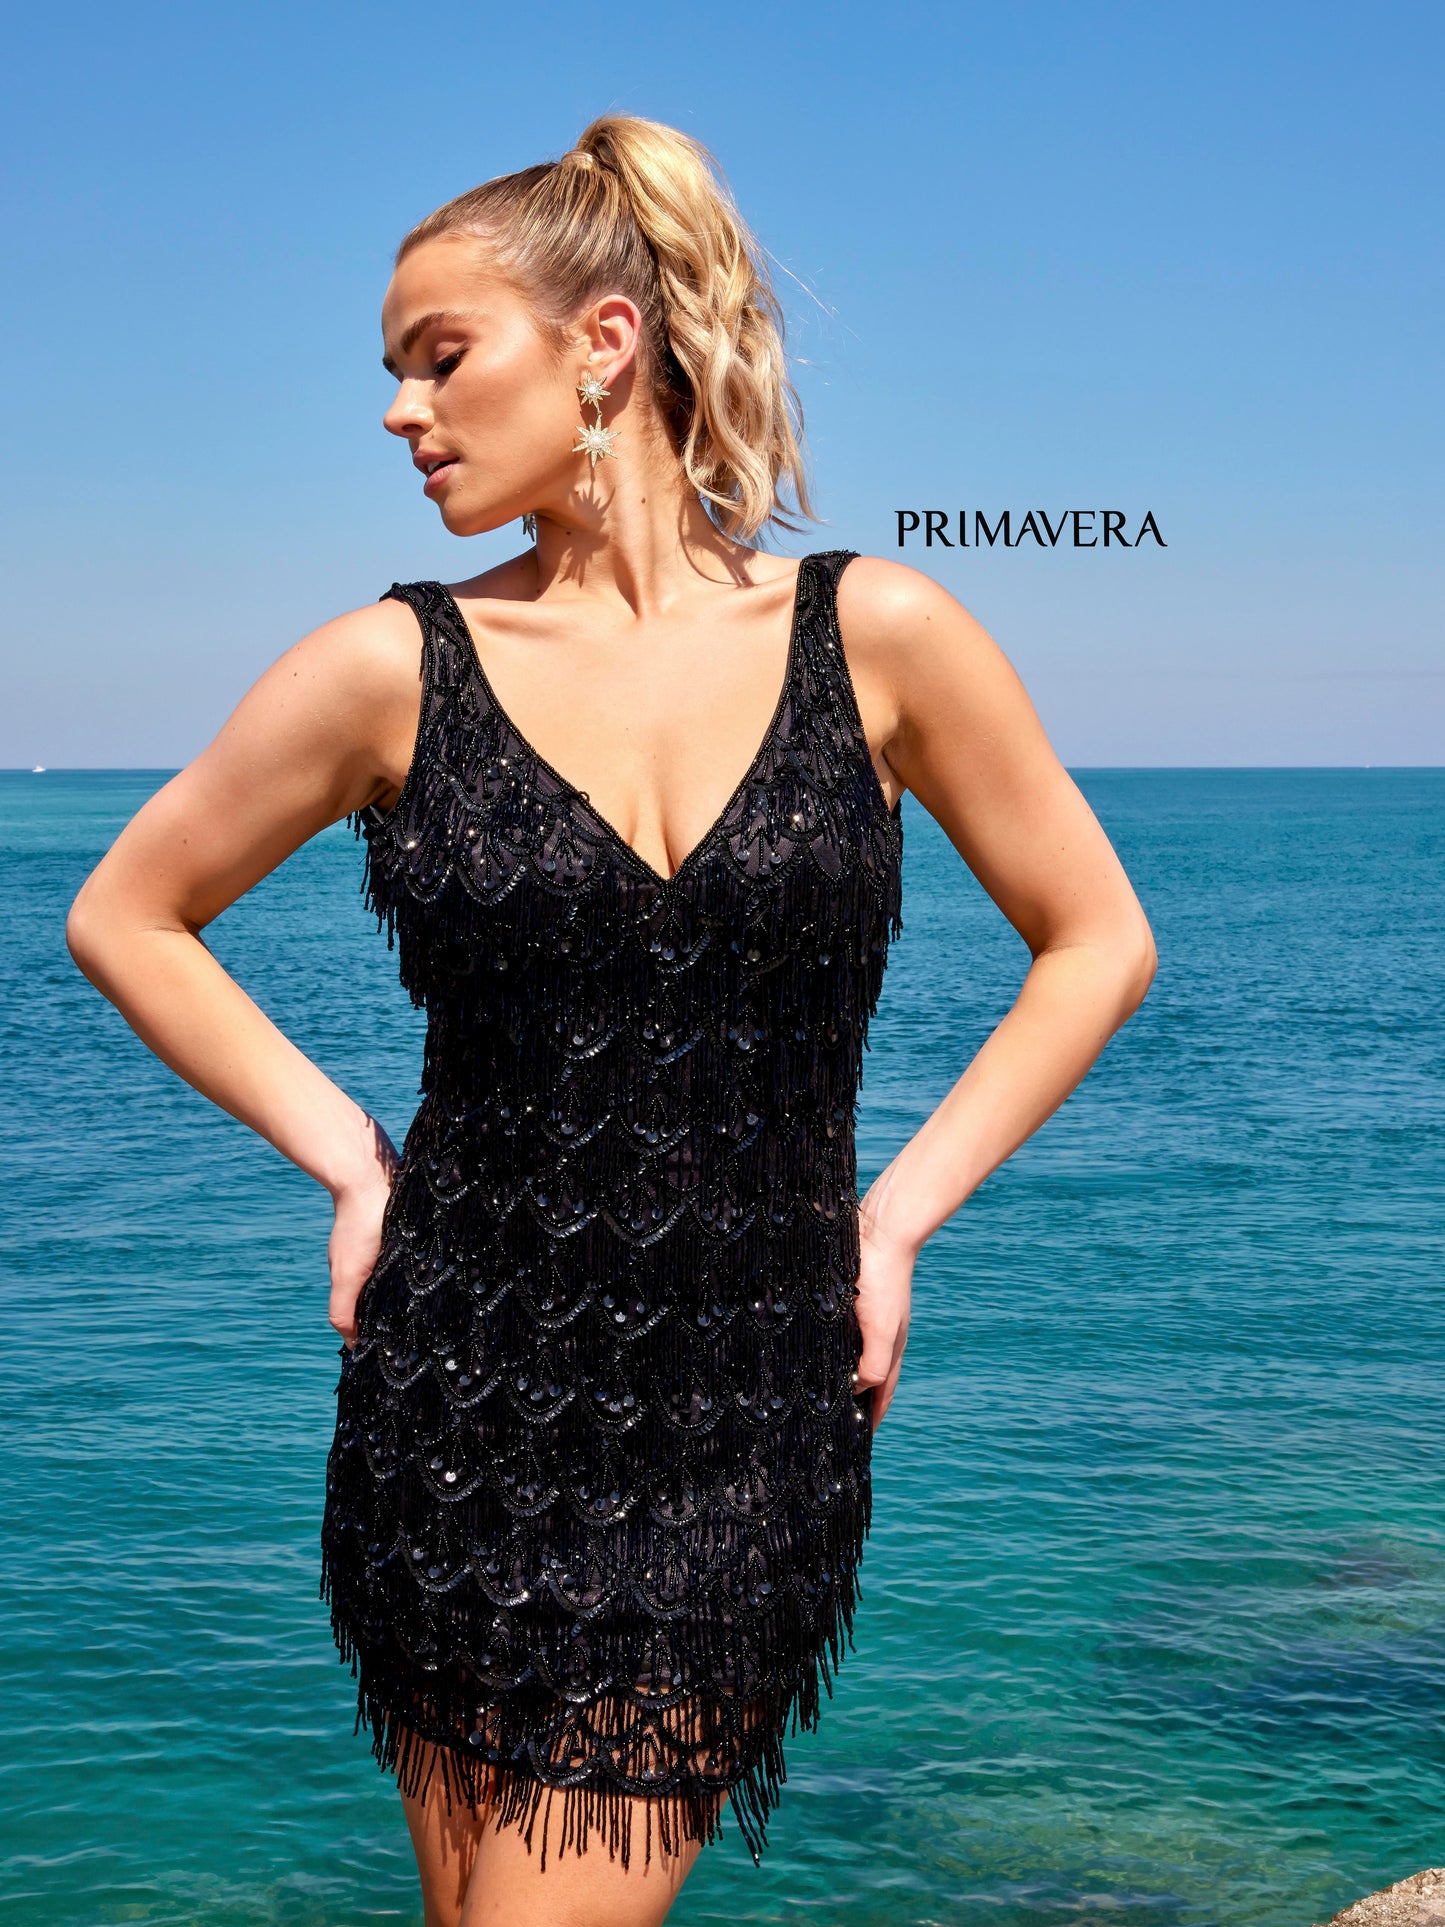 Primavera Couture 4042 Beaded Embellished Fringe With Stones V-Neck Cocktail Homecoming Dress. This Primavera Couture dress is sure to make a statement. A V-neck style adorned with beaded fringe, stones, and embellishments creates a unique and polished look with modern appeal. Perfect for a special occasion.